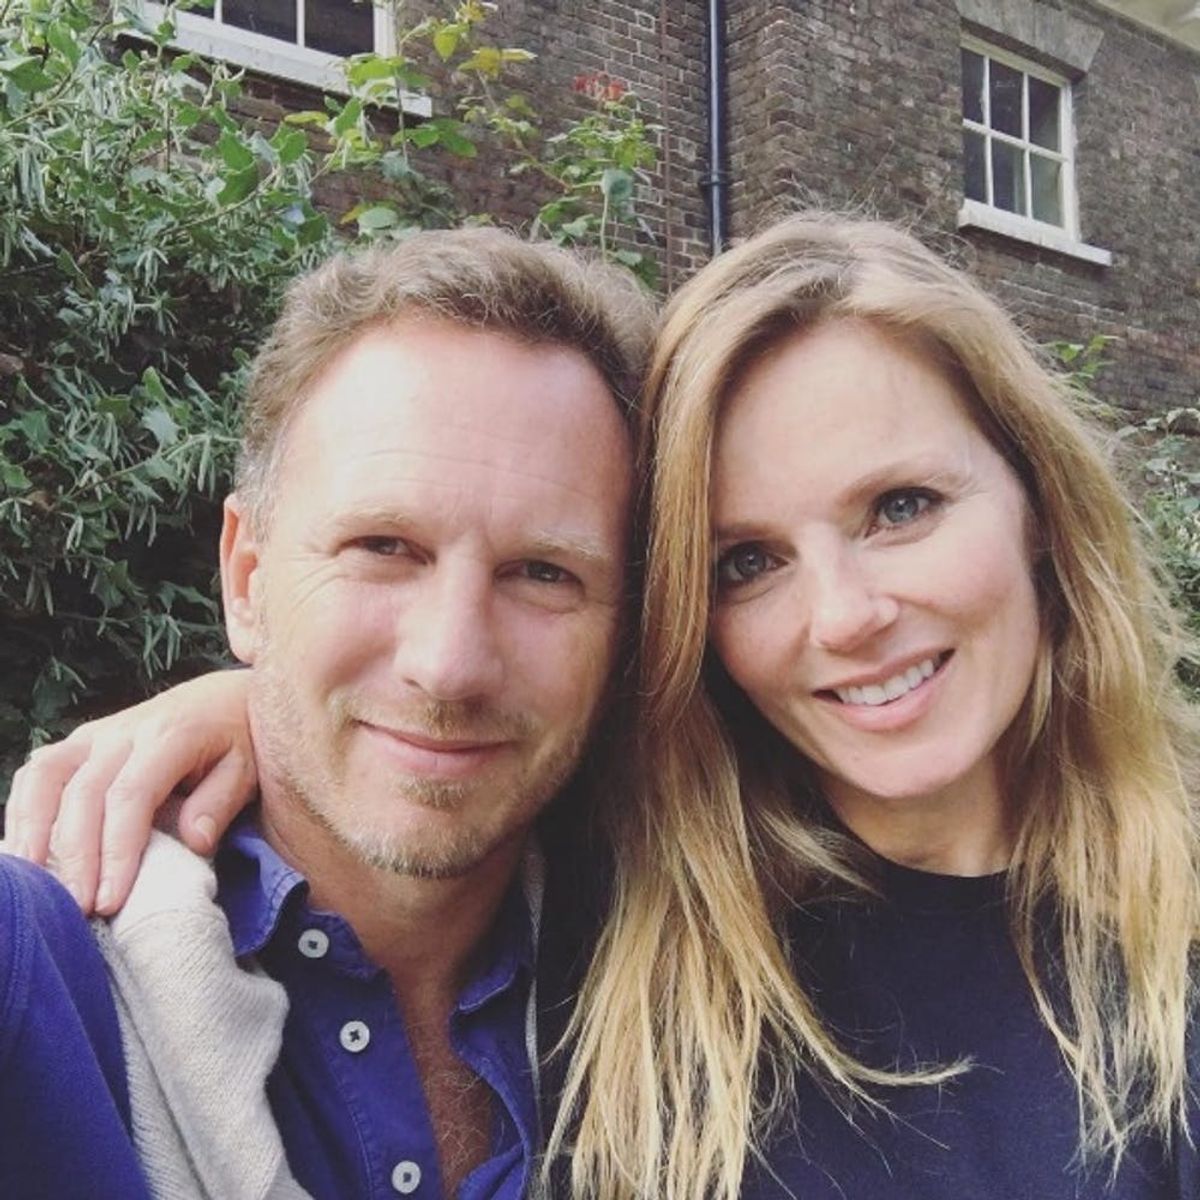 Geri Halliwell Is Pregnant With Baby #2!